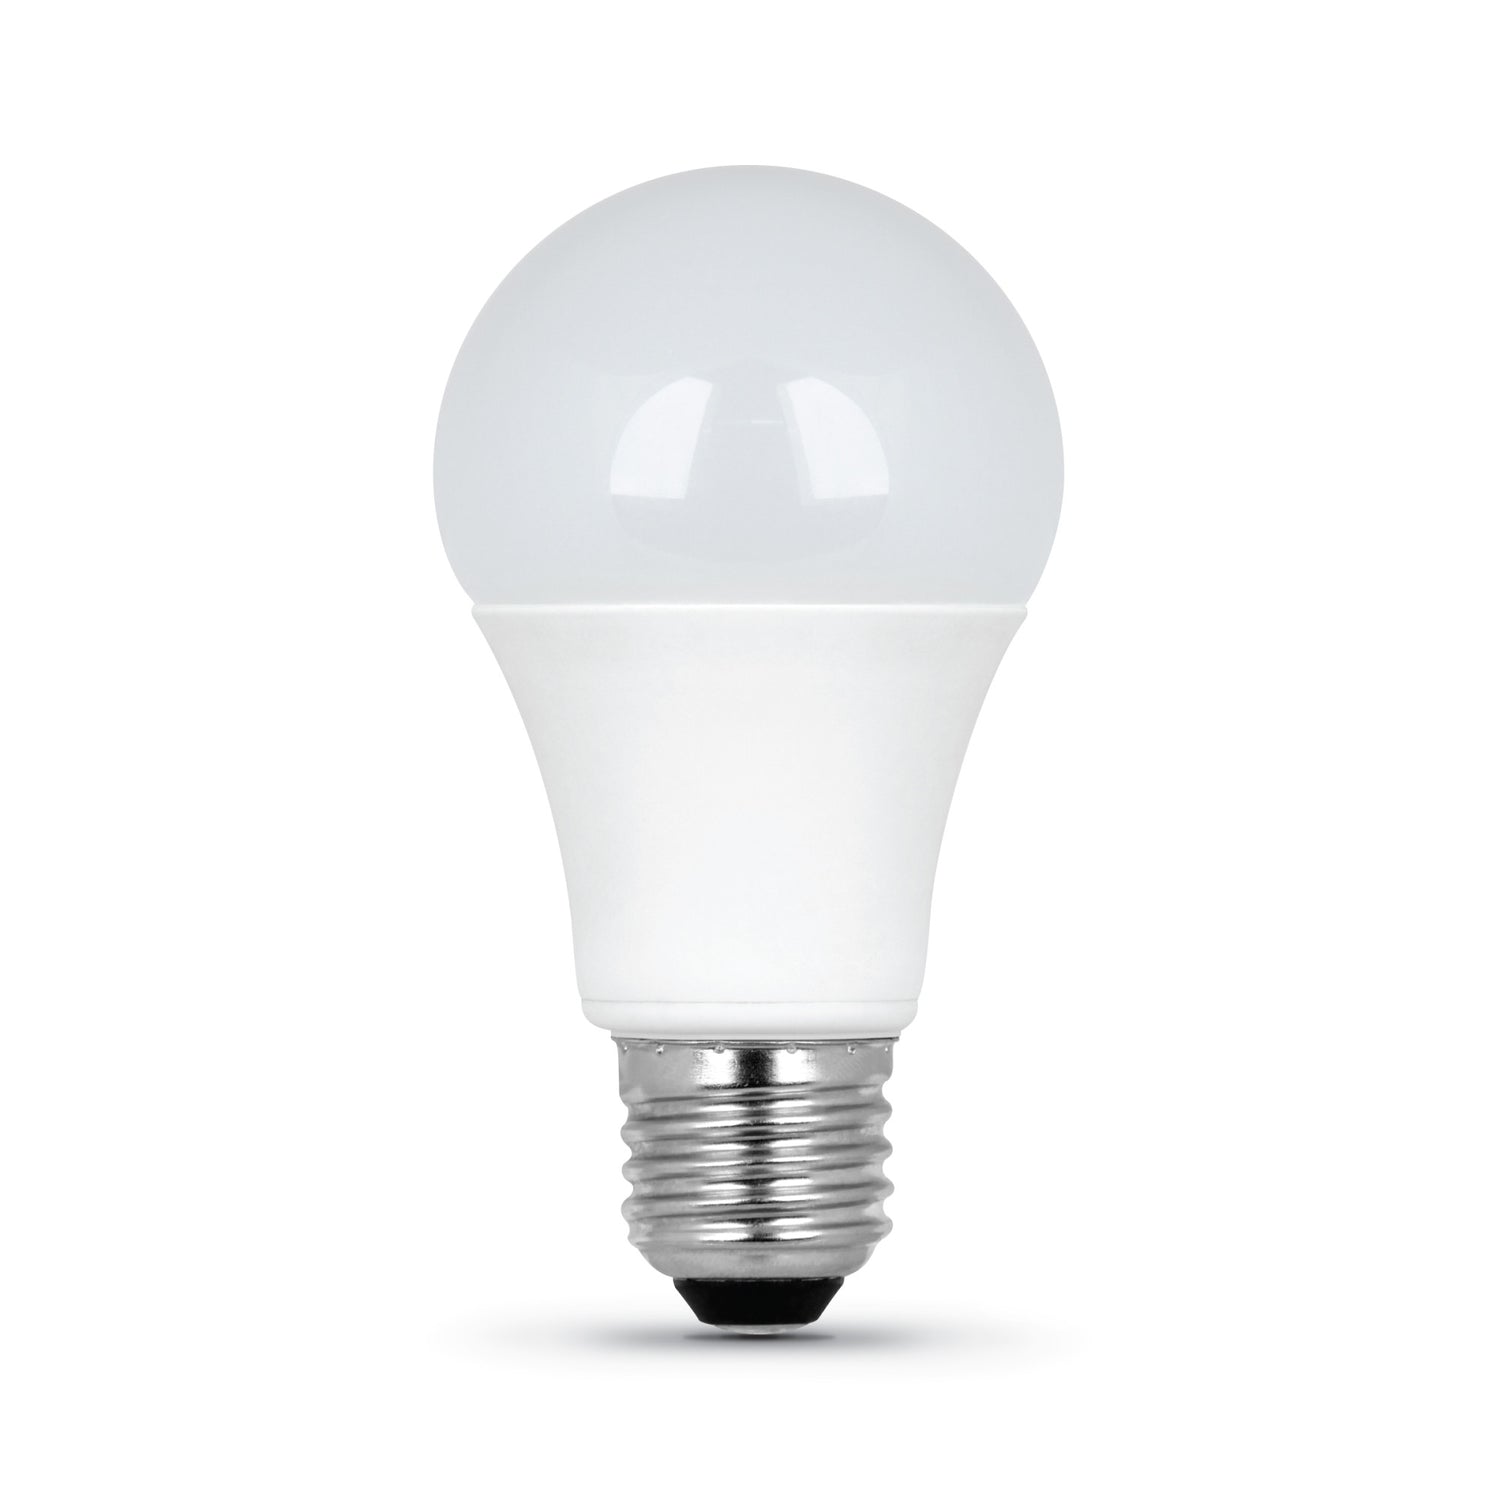 10W (60W Replacement) Neutral White (3500K) E26 Base A19 Non-Dimmable LED Light Bulb (24-Pack)